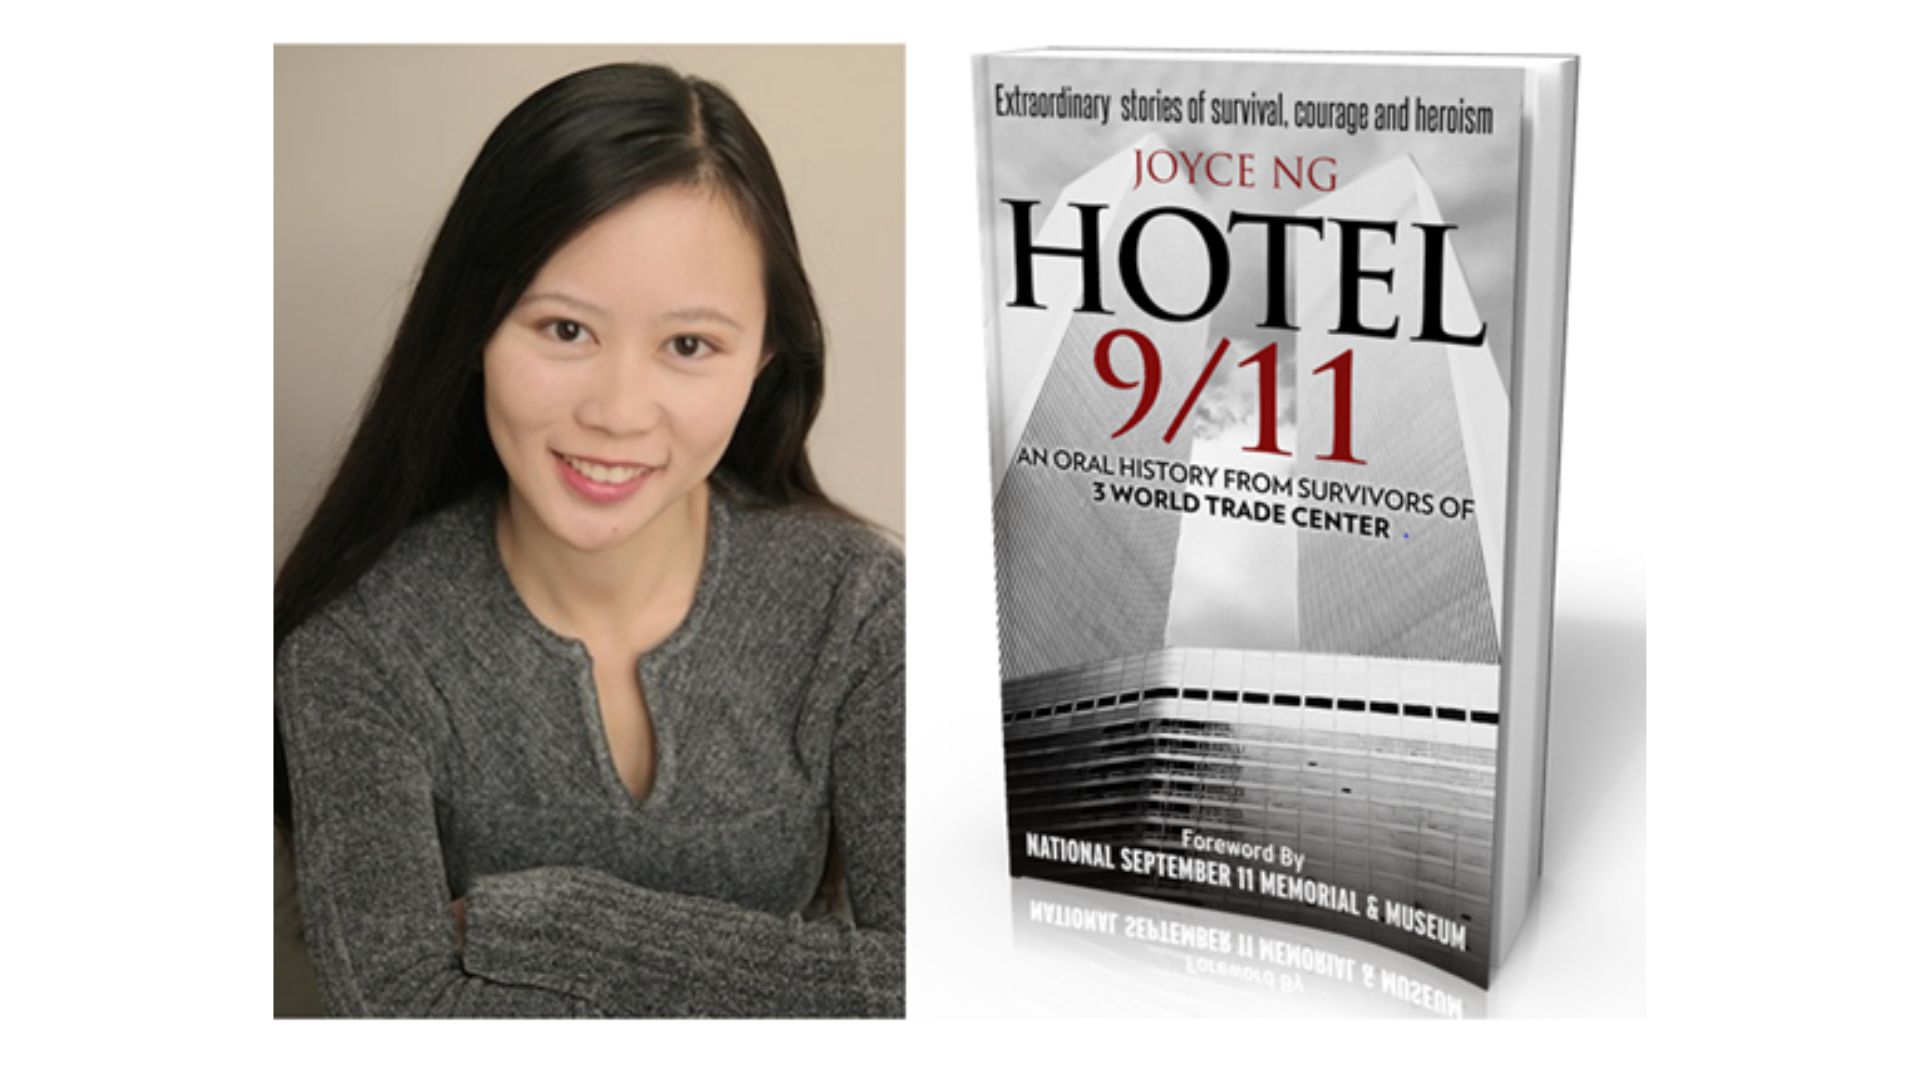 Headshot of author Joyce Ng, left, next to the cover of her book Hotel 9/11, against a white background